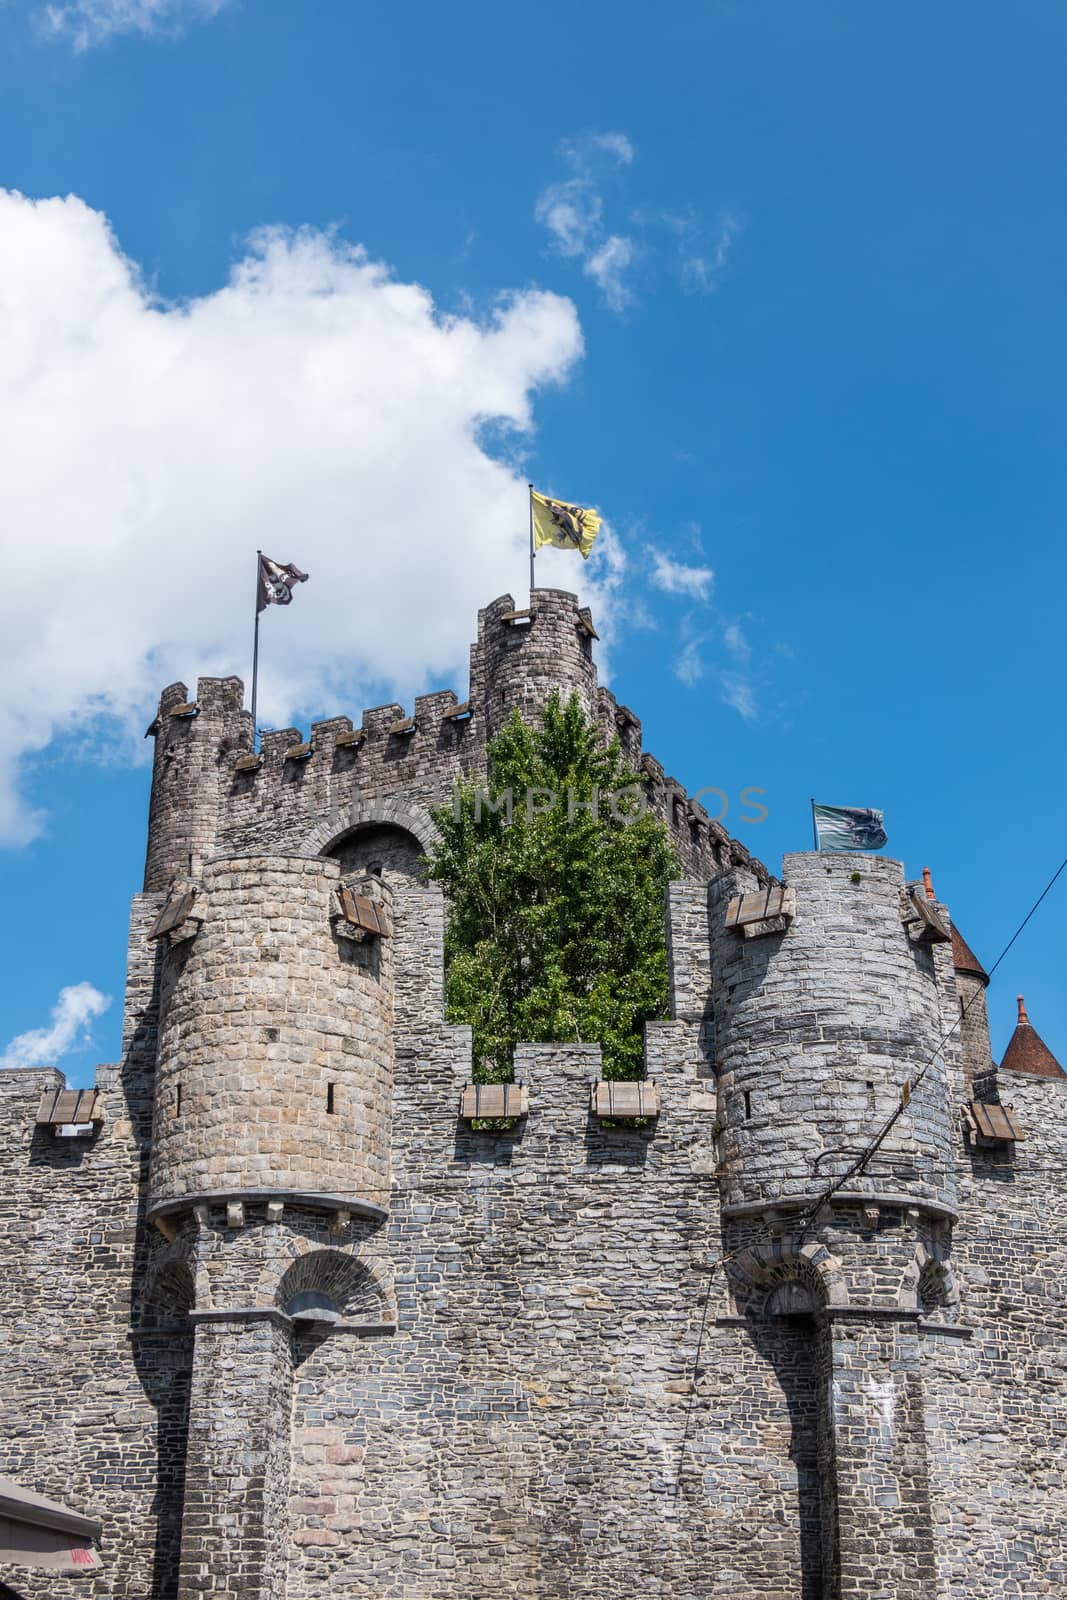 Gent, Flanders, Belgium -  June 21, 2019: Gray stone tower and ramparts of Gravensteen, historic medieval castle of city against blue sky with white clouds. Flags on top, green foliage.